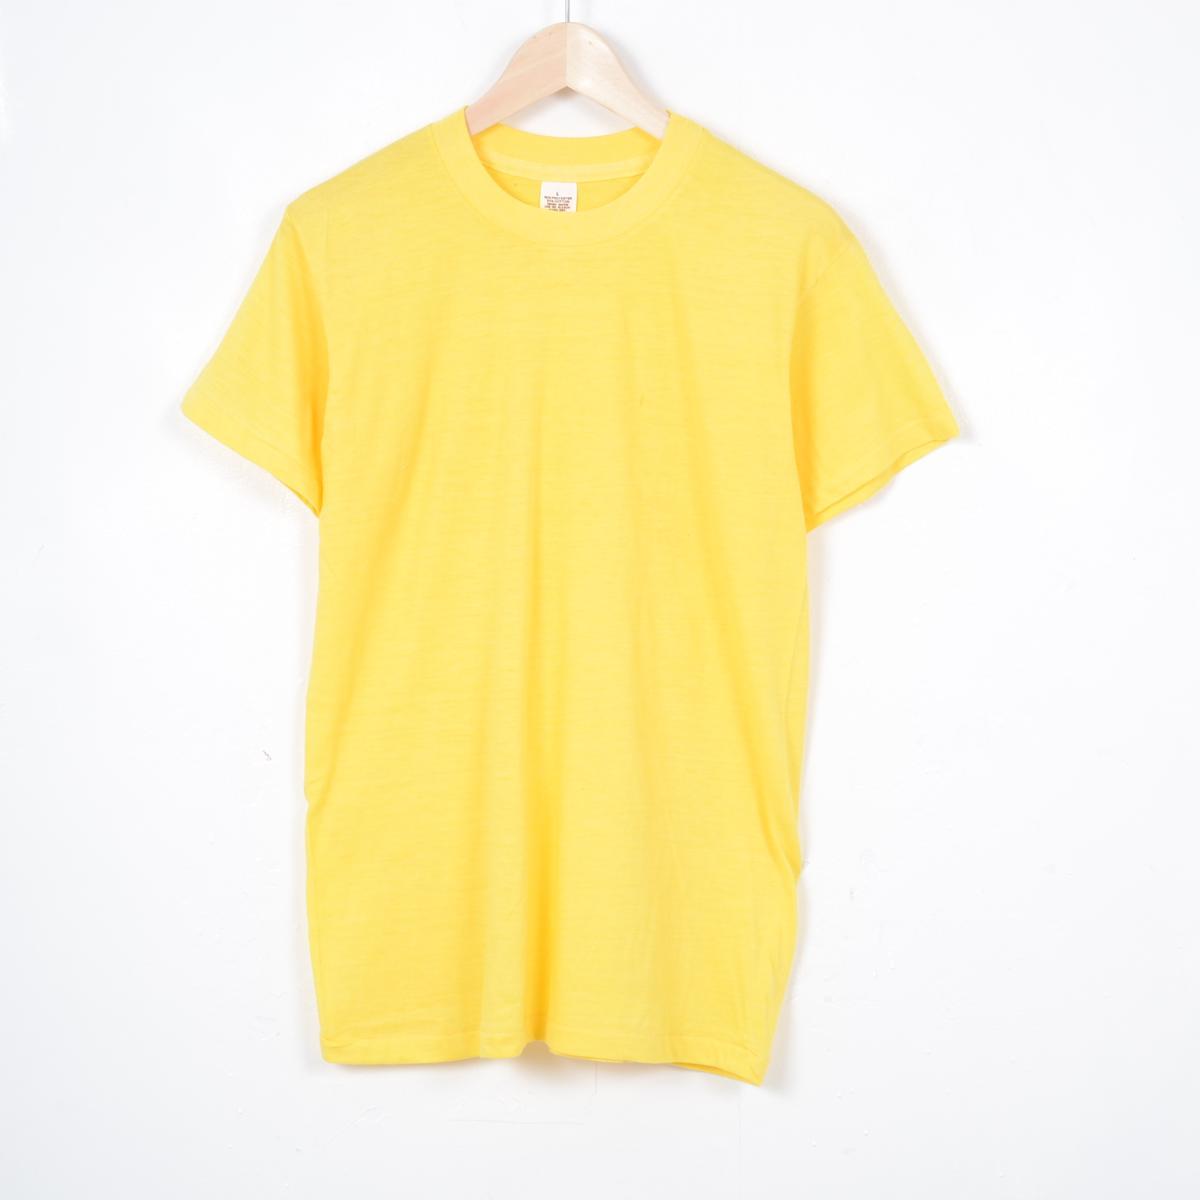 Yellow T Shirt Front And Back Plain - ClipArt Best